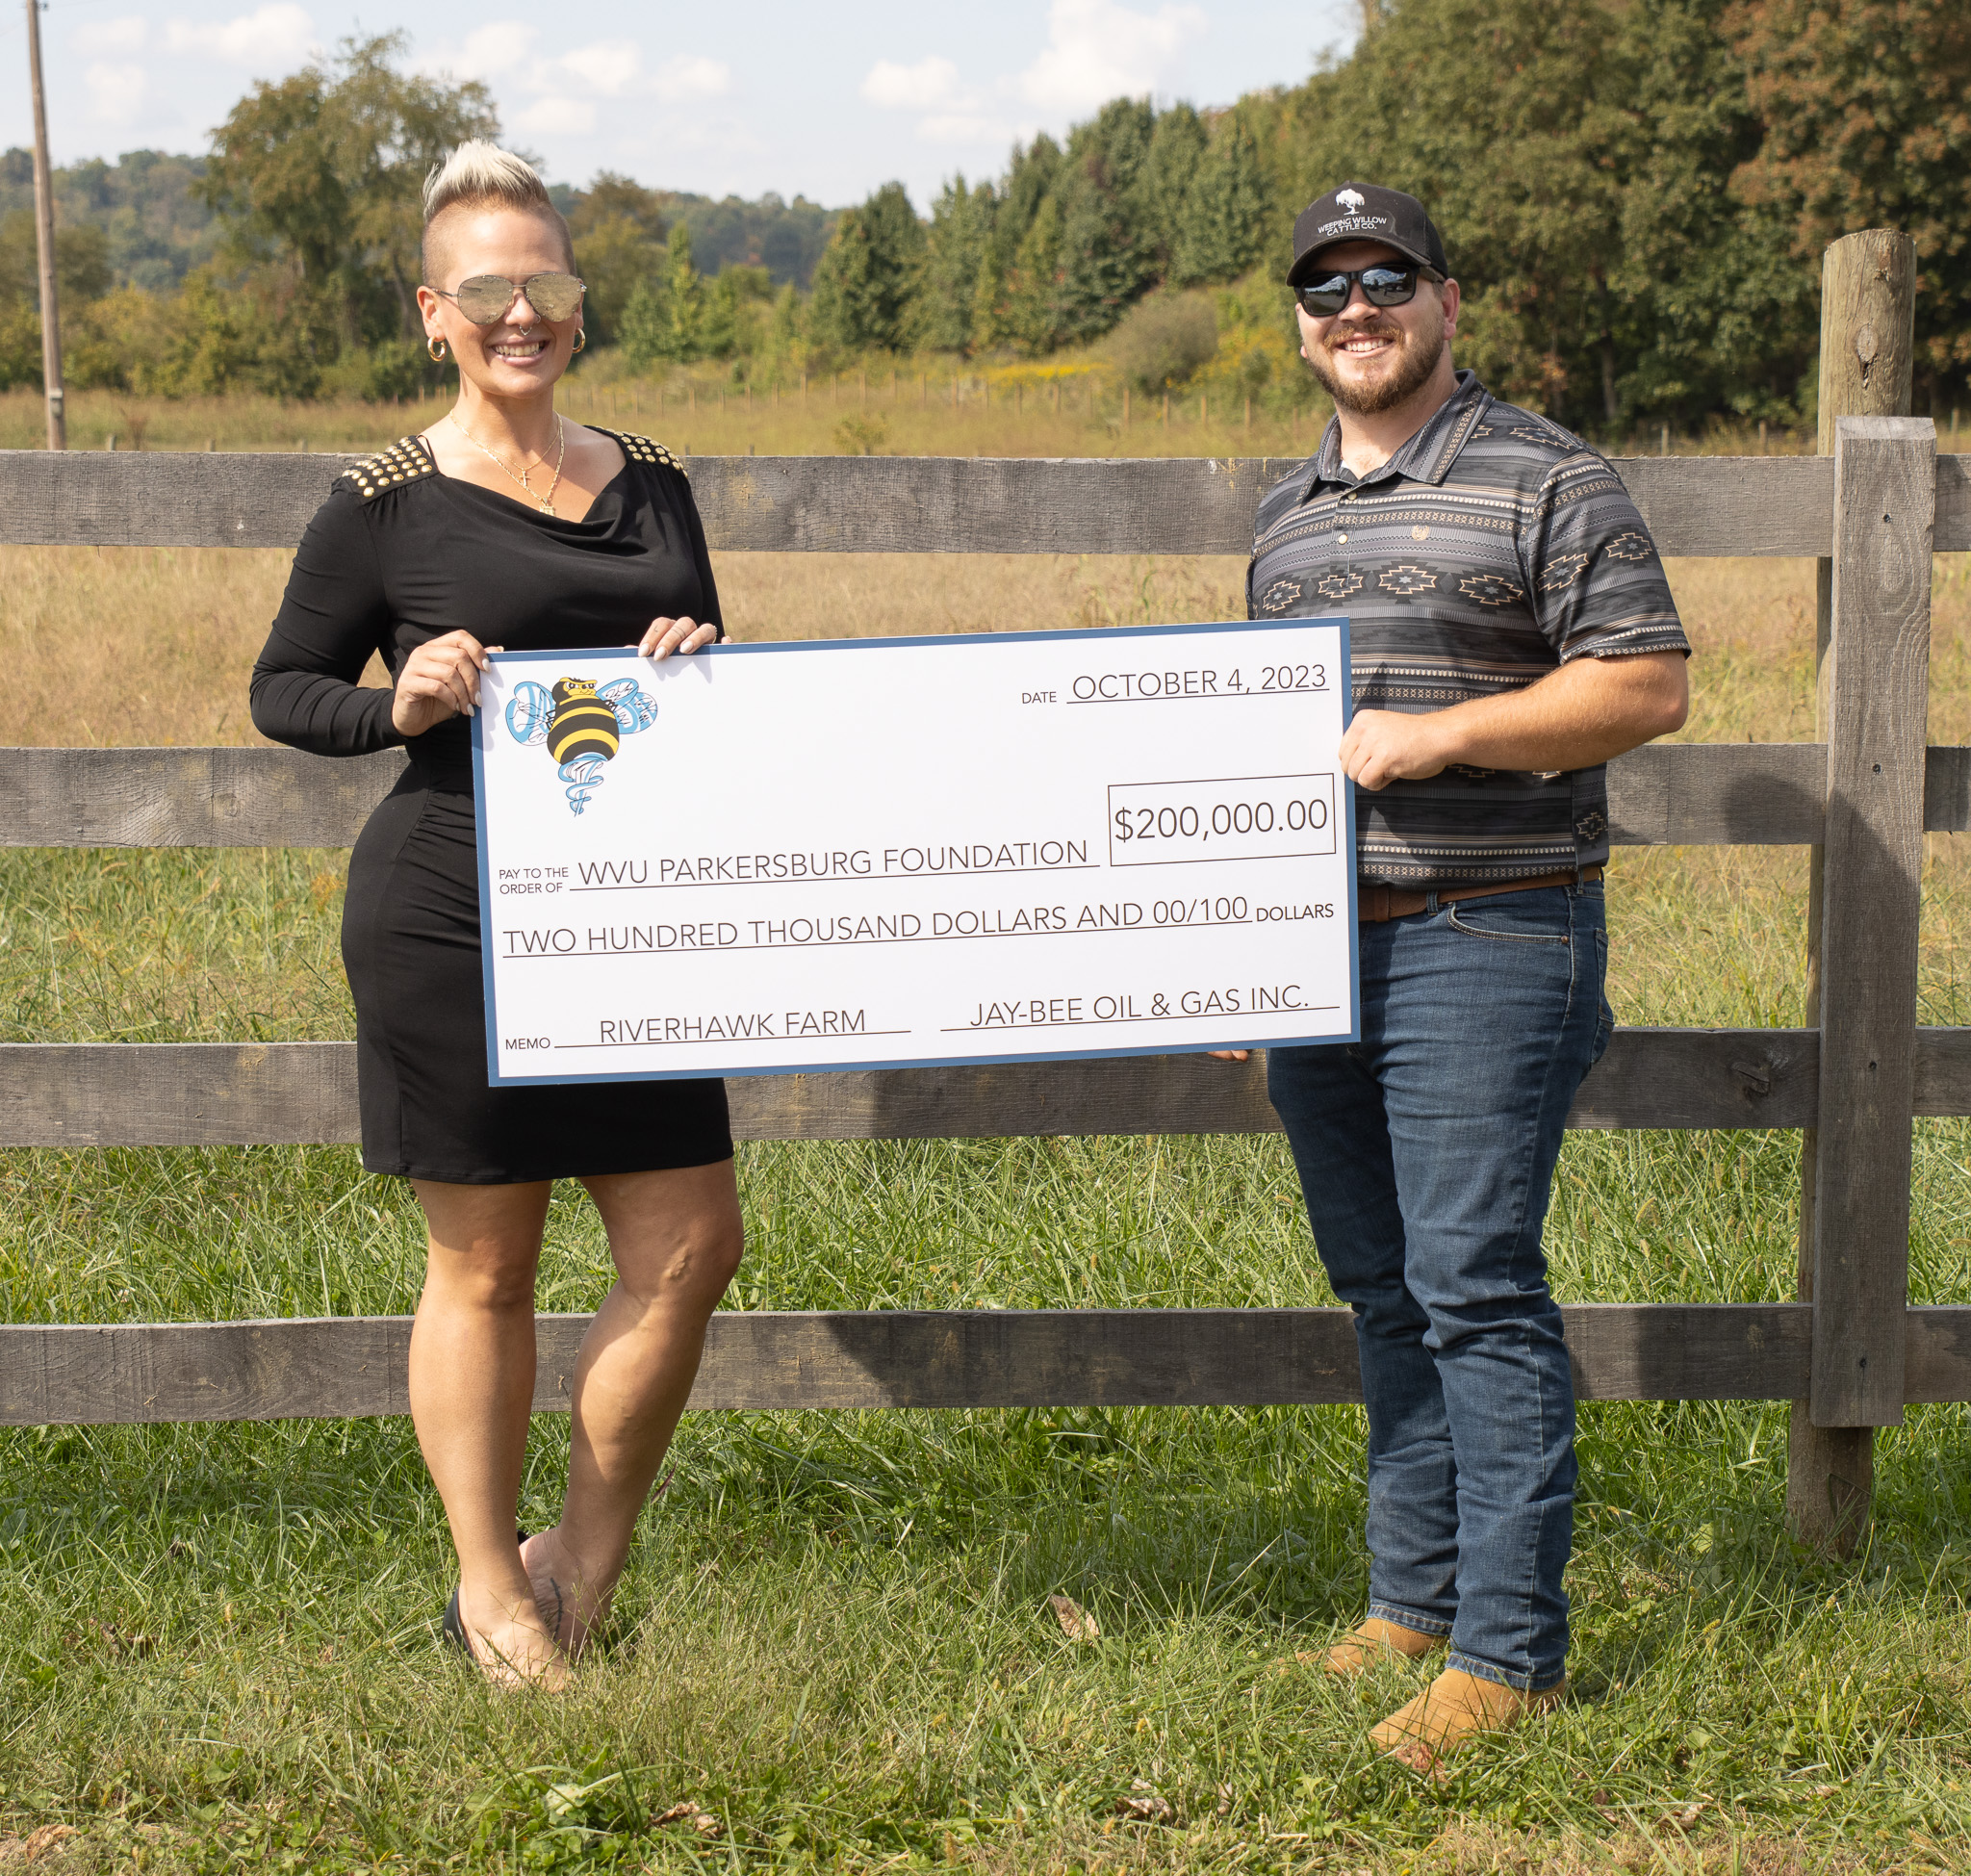 WVU at Parkersburg Foundation receives donation from Jay-Bee Oil